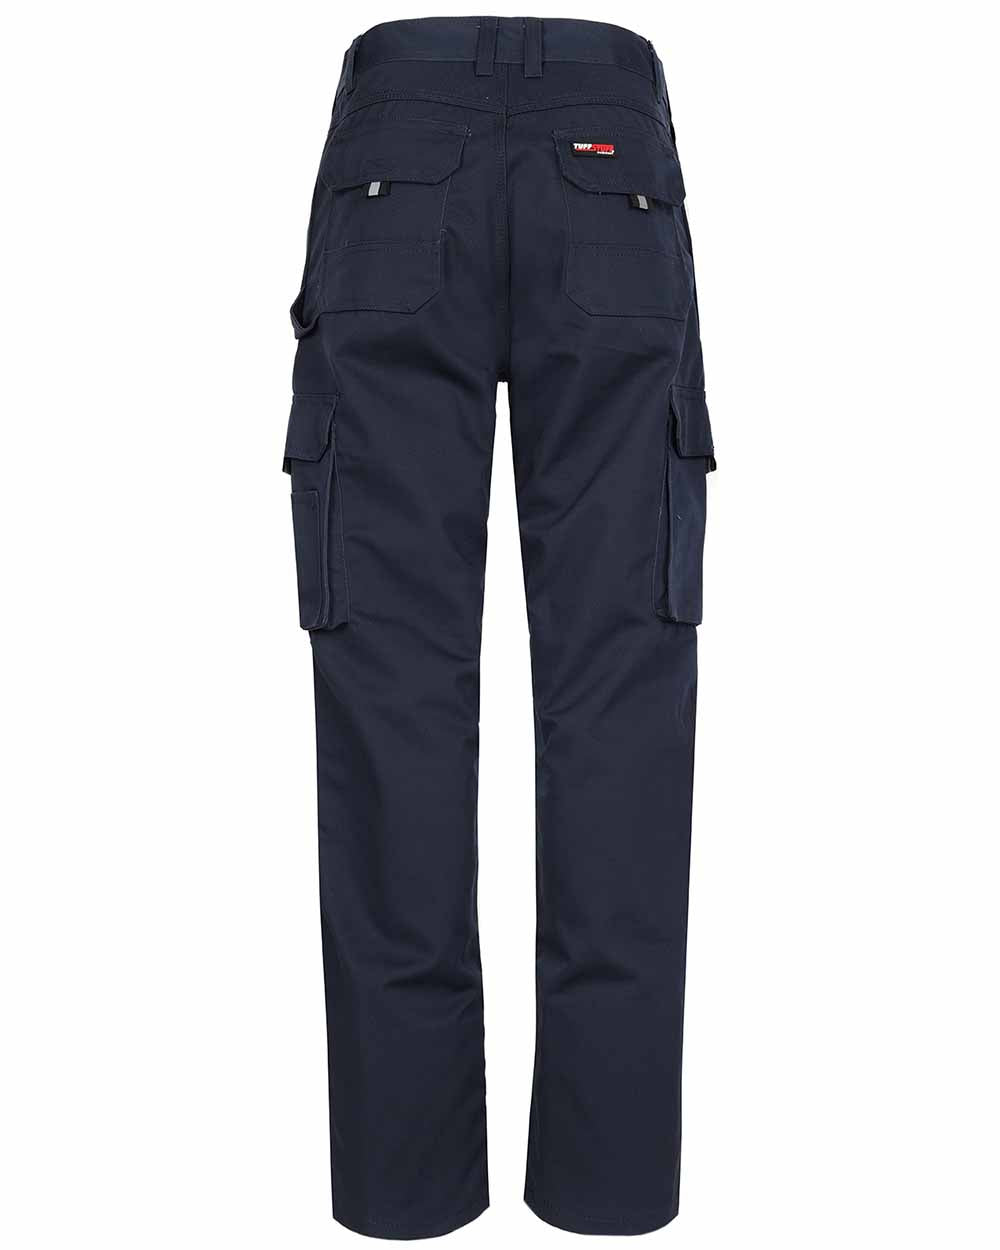 BAck view TuffStuff Pro Work Trousers in Navy 